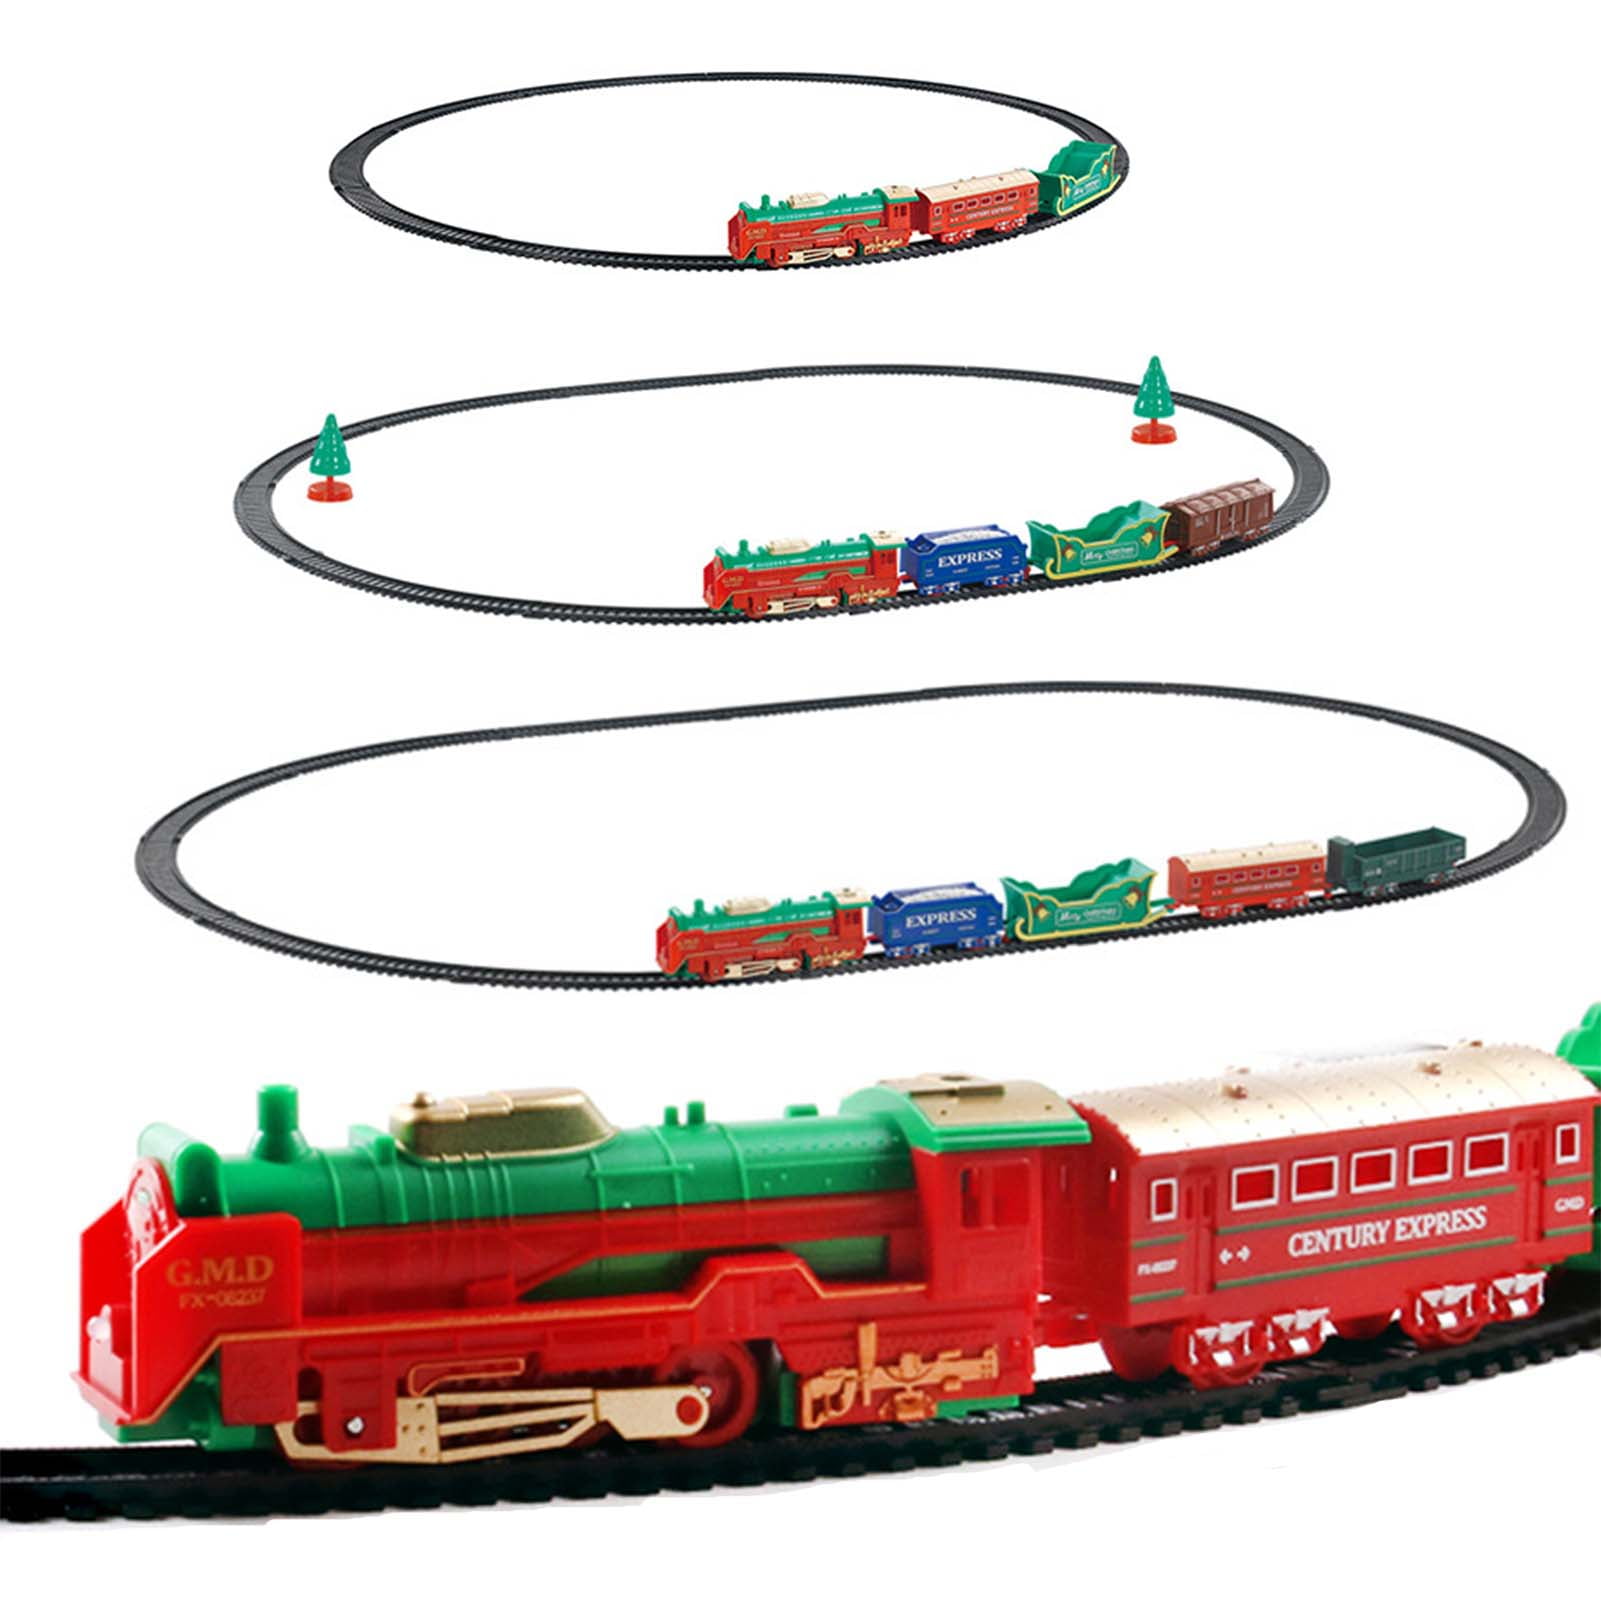 15Pcs Christmas Train Round Track Set With Light Sound Smoke For Children Gift 